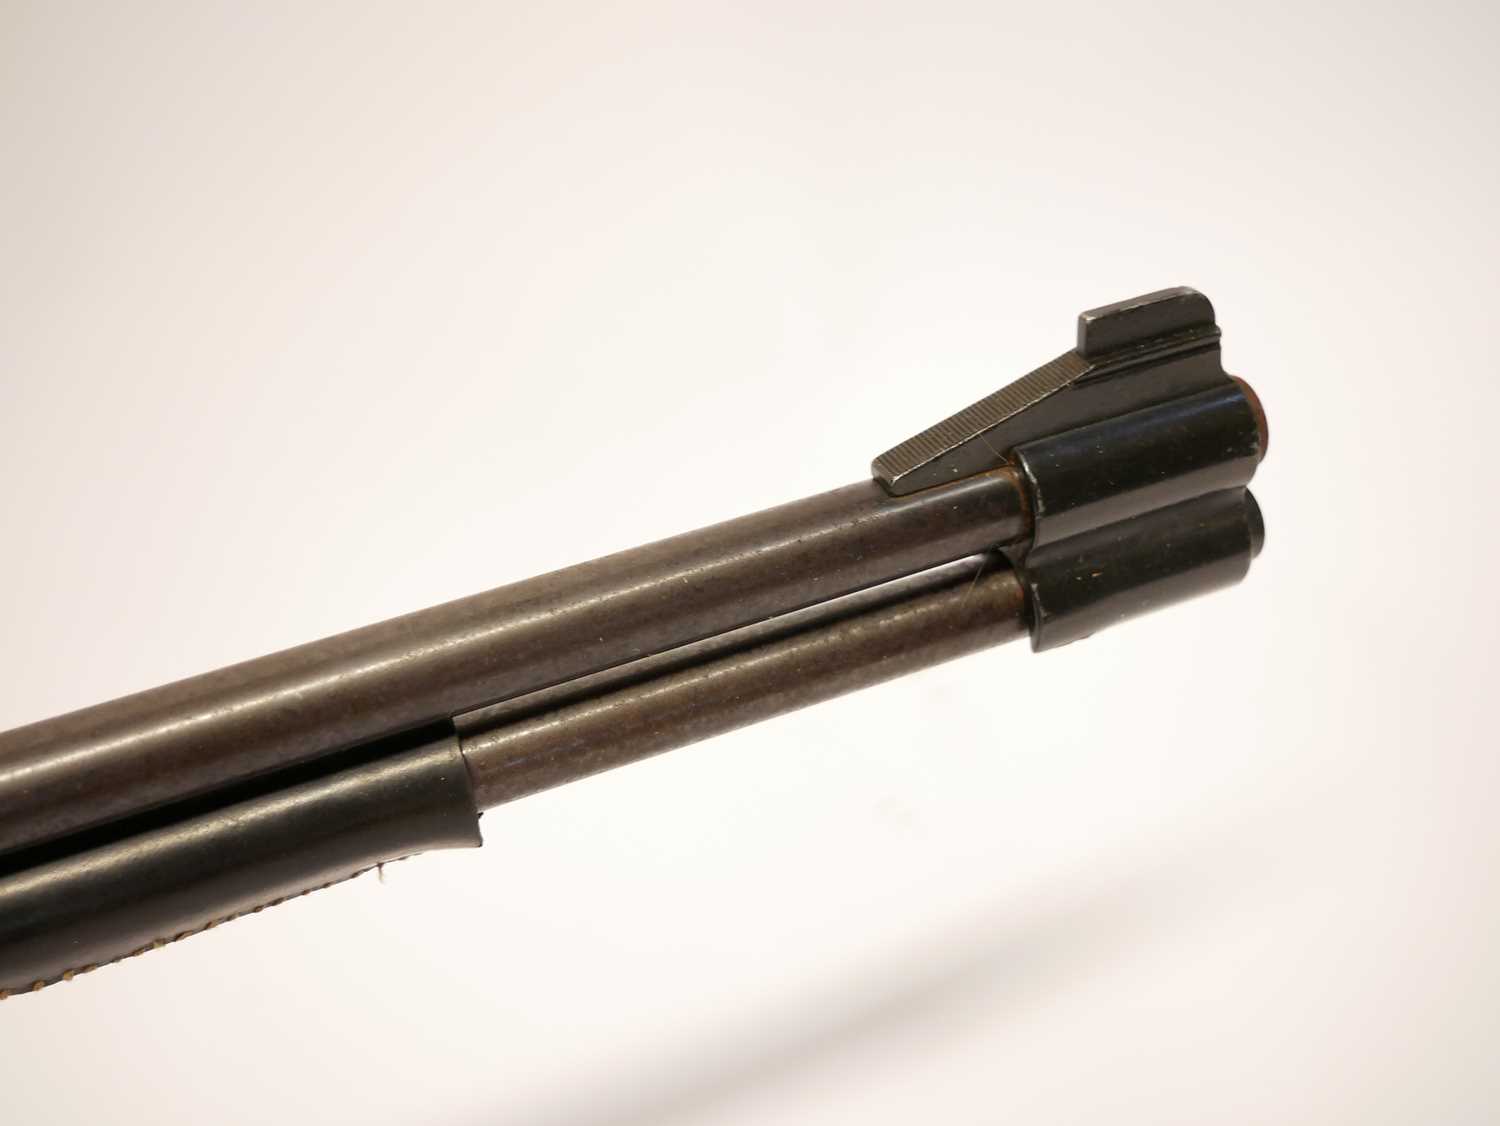 Weihrauch HW77 .22 air rifle serial number 1002371, 18 inch barrel, with Apollo 4x32 scope and a - Image 7 of 10